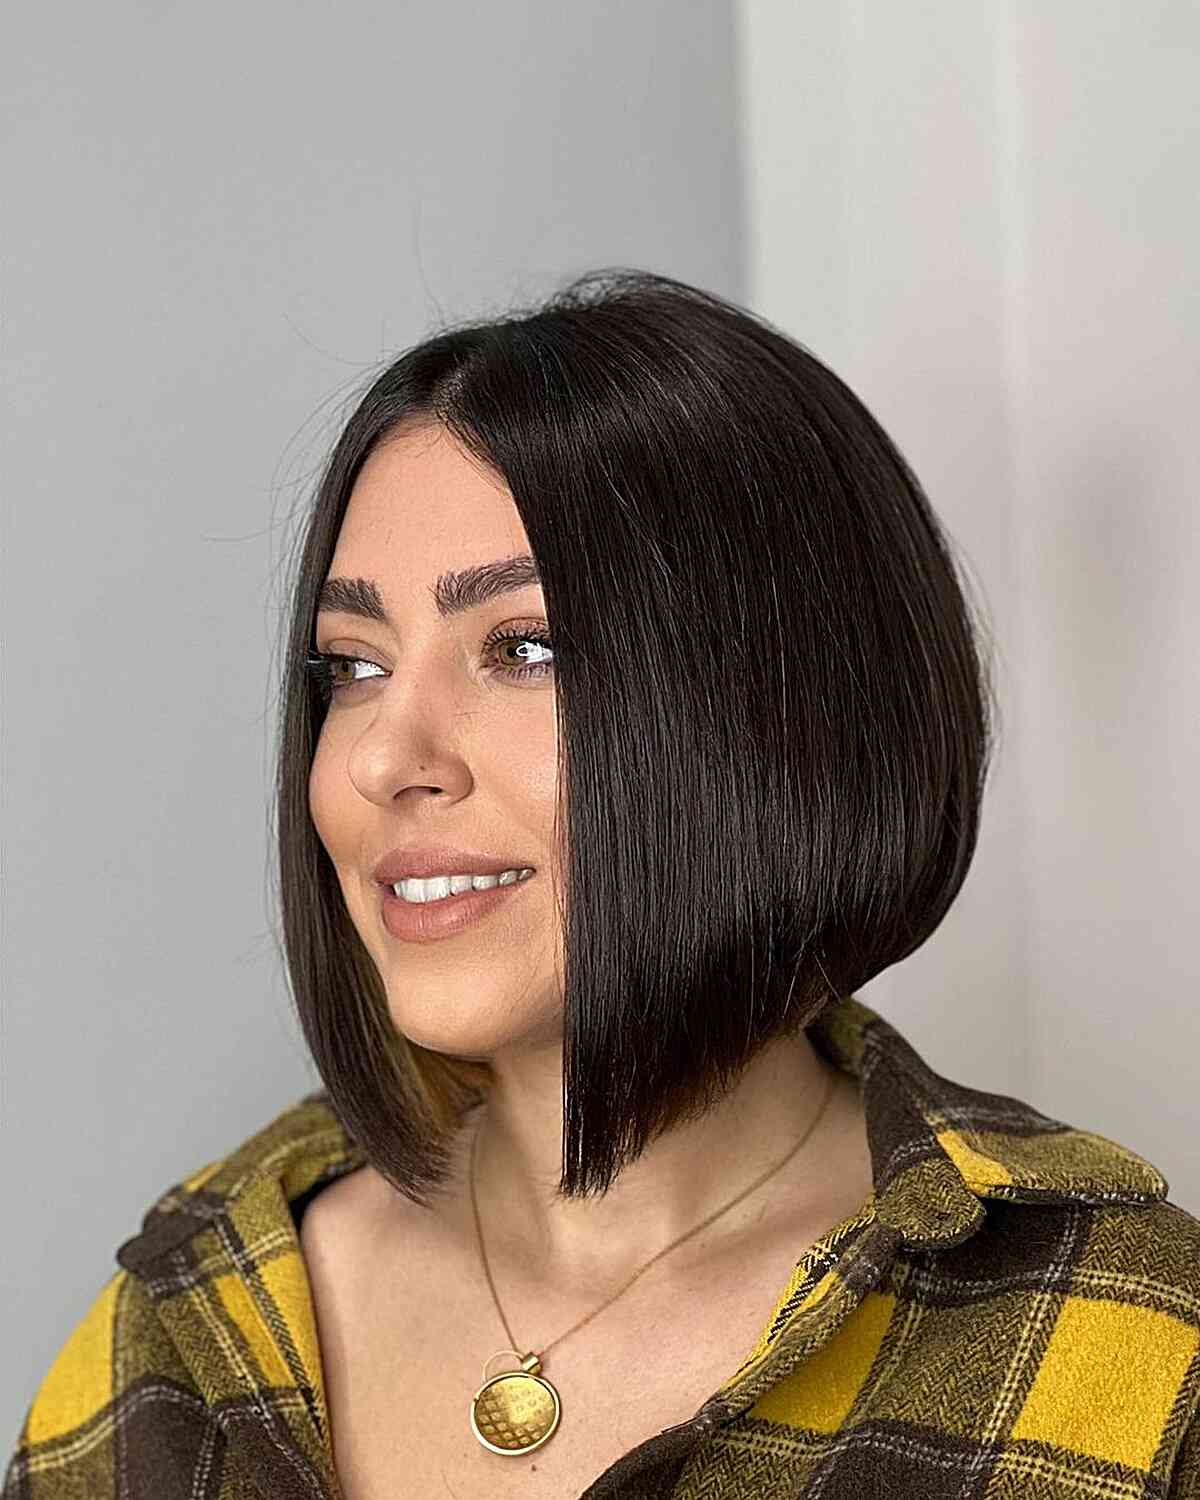 Sleek A-Line Slob Hairstyle for women with a middle part and face-framing